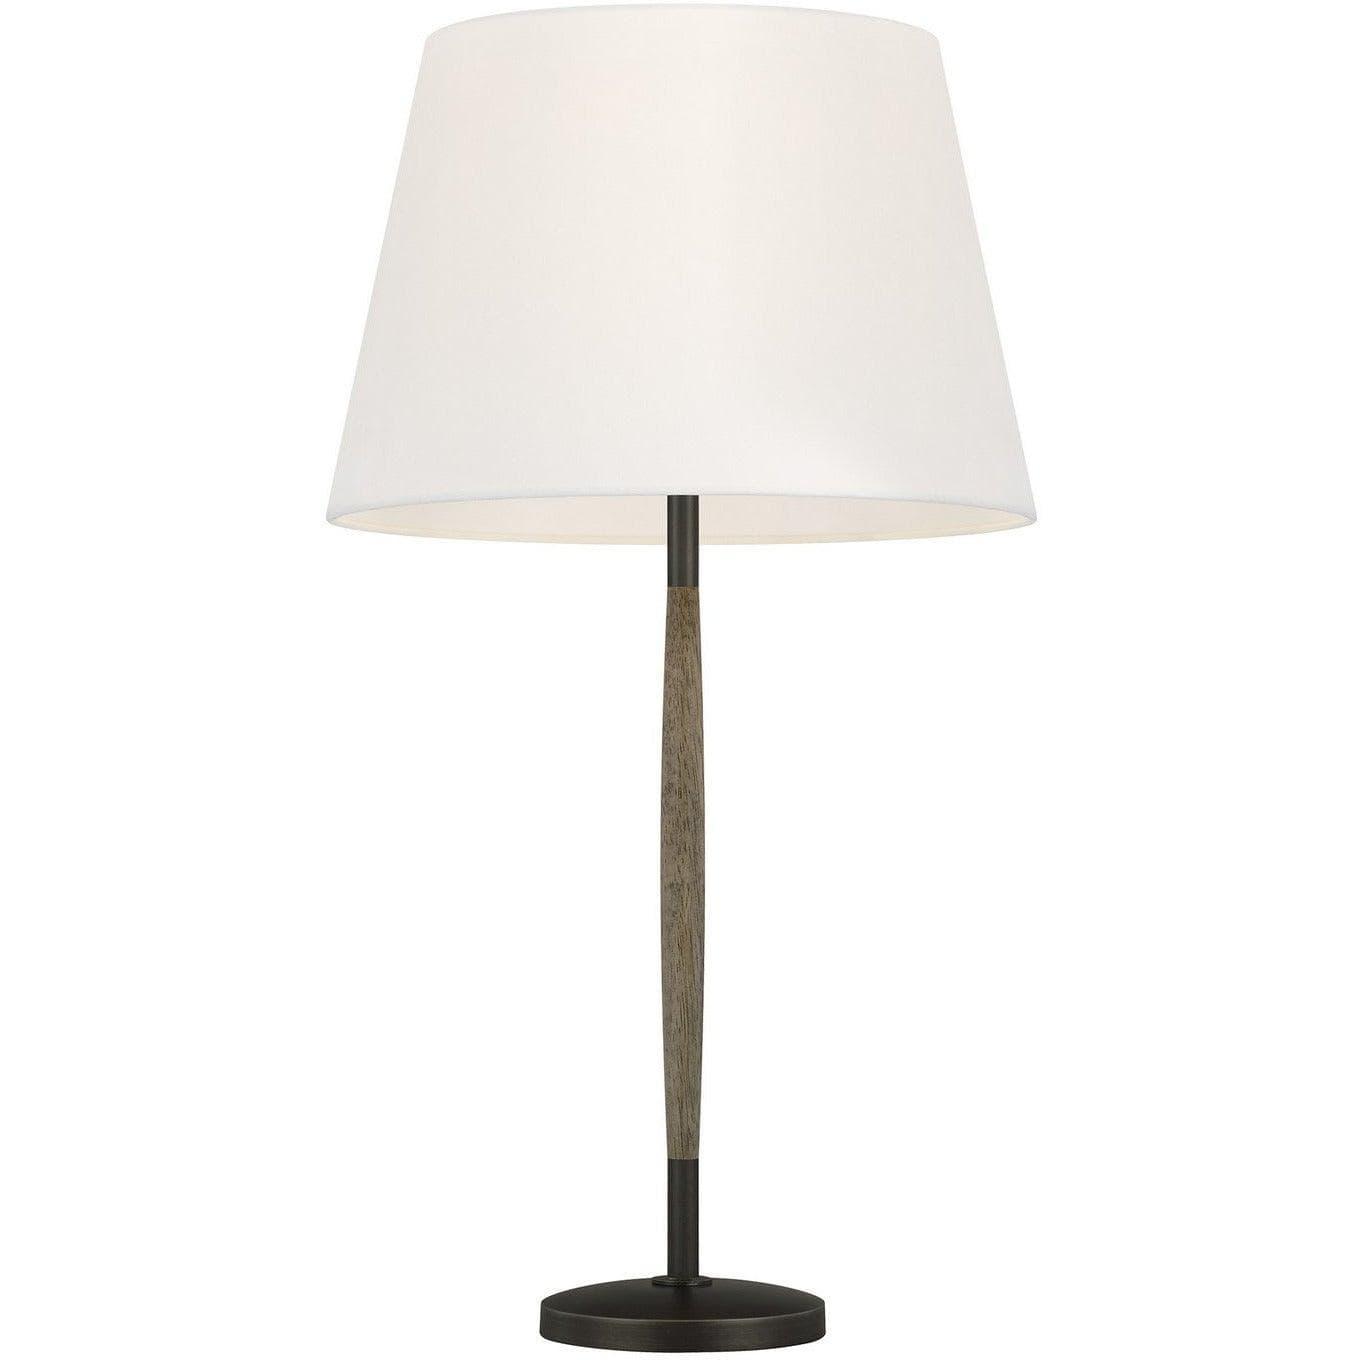 Visual Comfort Studio Fanny One Light Table Lamp in Matte White Ceramic  finish ( SKU# HT1061MWC1 ) for Sale – Black Whale Home